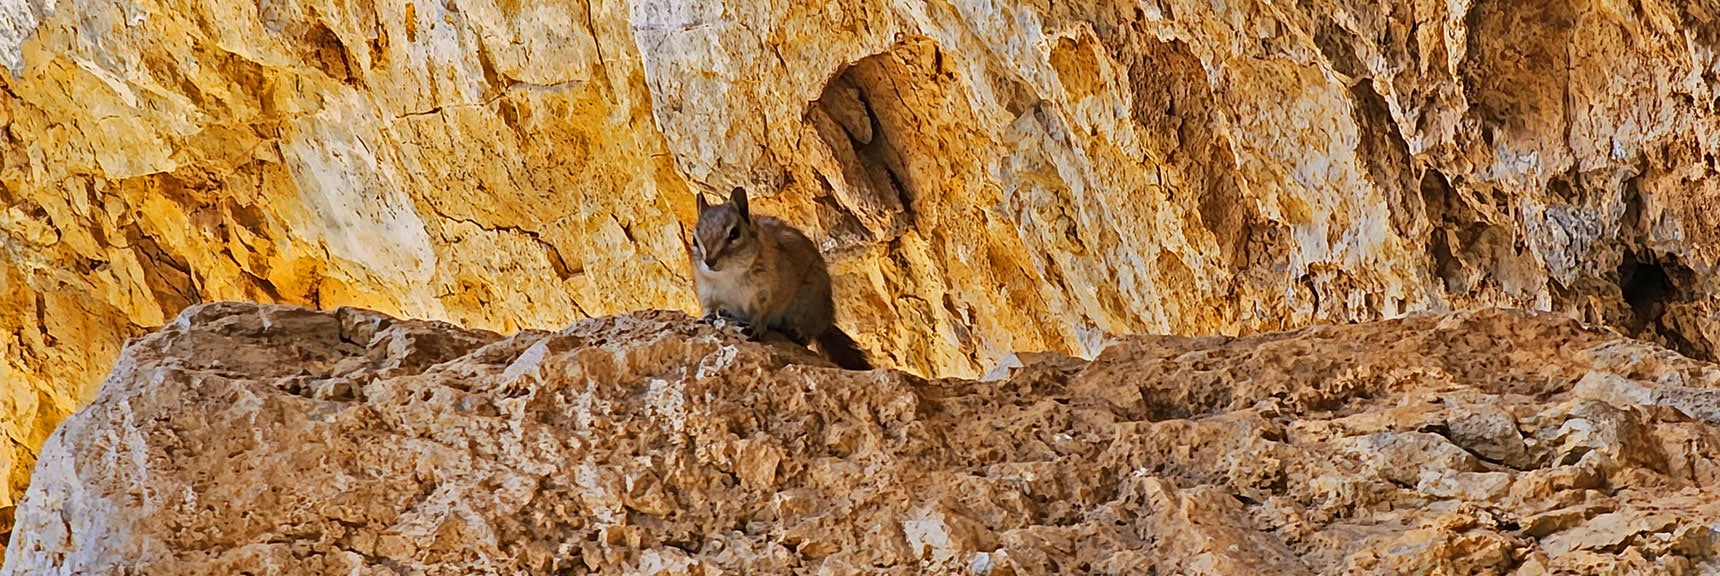 One of a Few Ambitious Cave Inhabitants Looking to Share My Lunch | Mary Jane Falls | Mt. Charleston Wilderness | Spring Mountains, Nevada